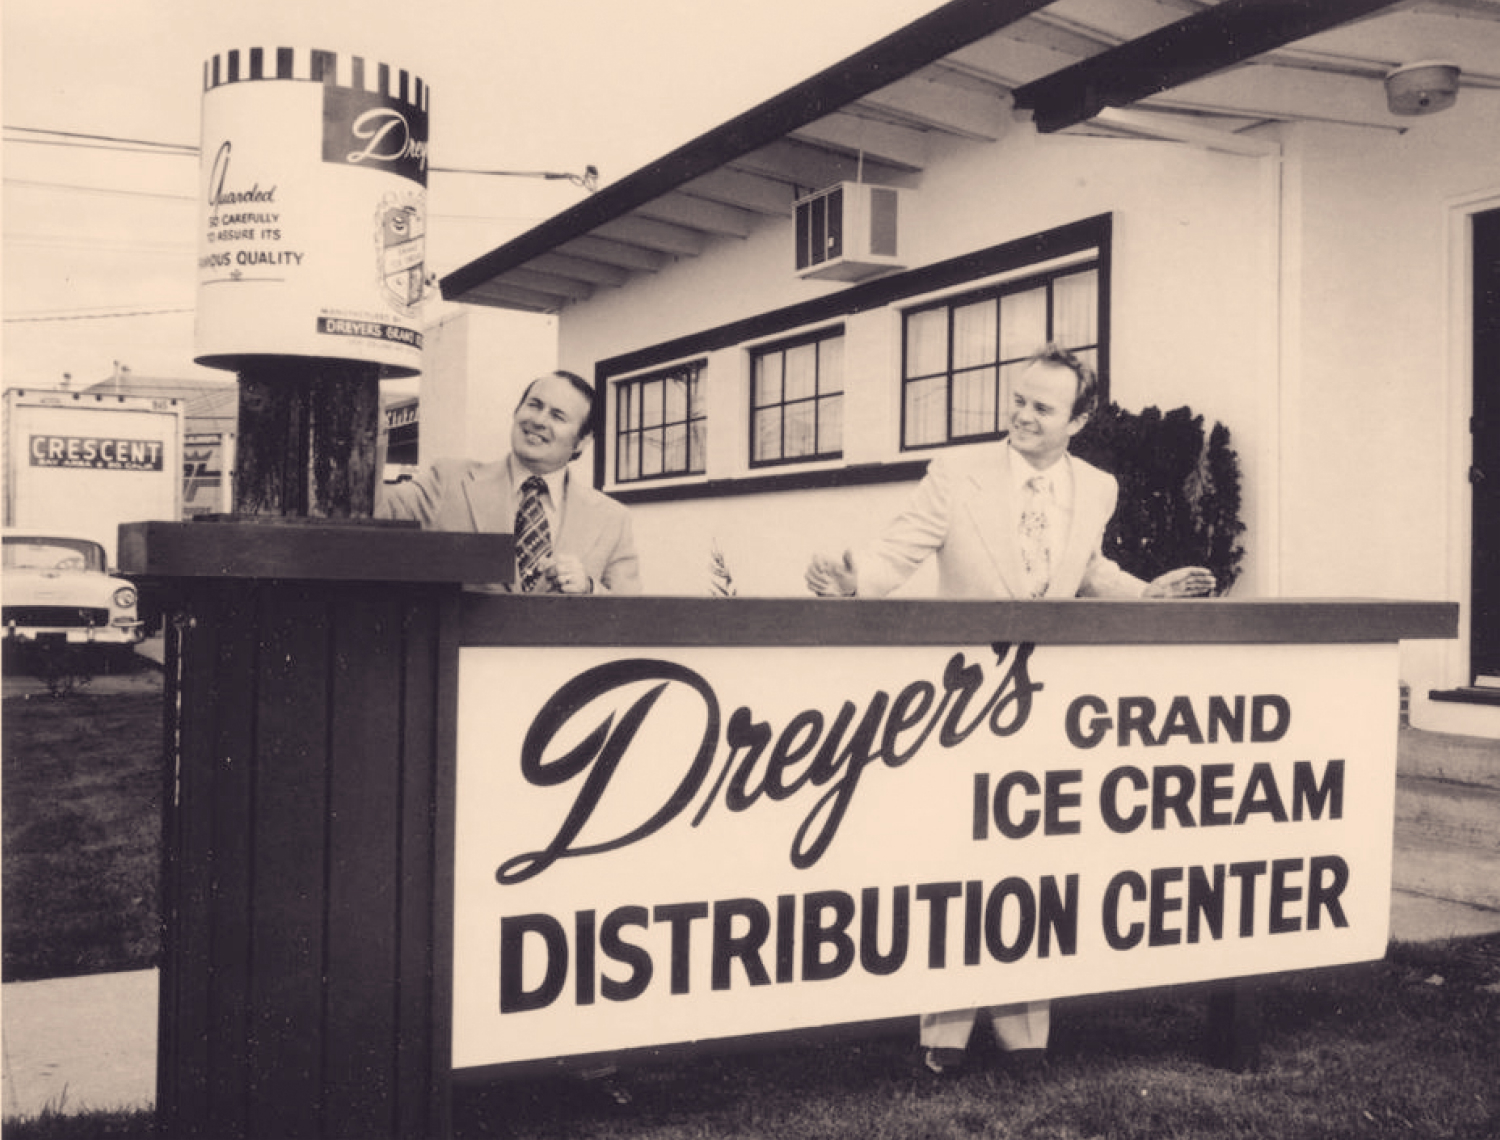 Old Sign outside of Dreyer's grand ice cream distribution center